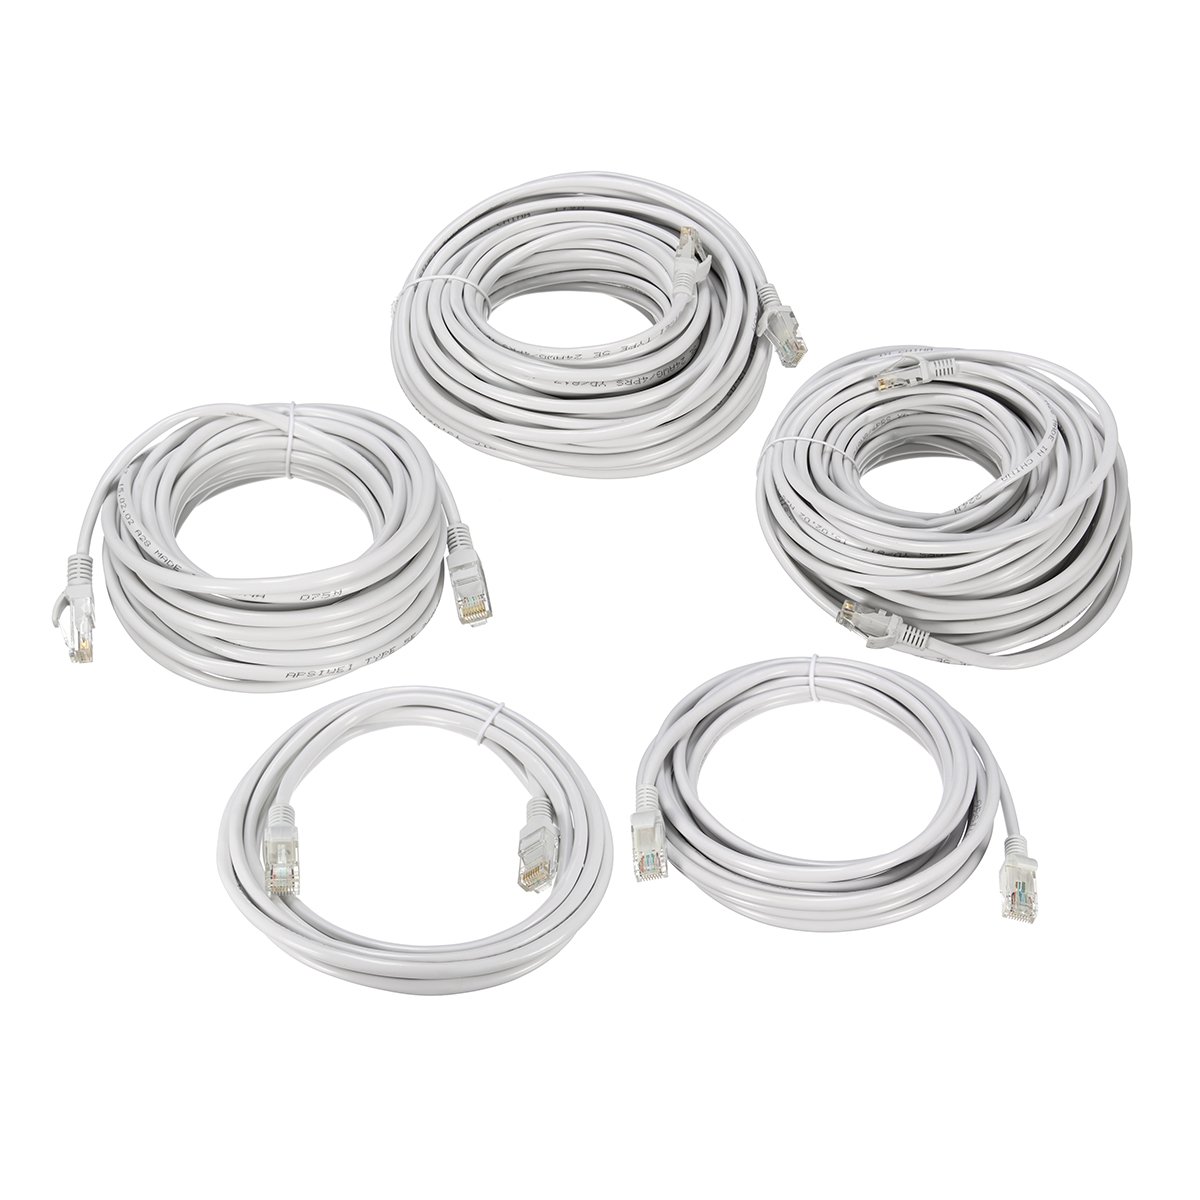 3/5/10/20m RJ45 Patch LAN Cord Ethernet Networking Cable 2